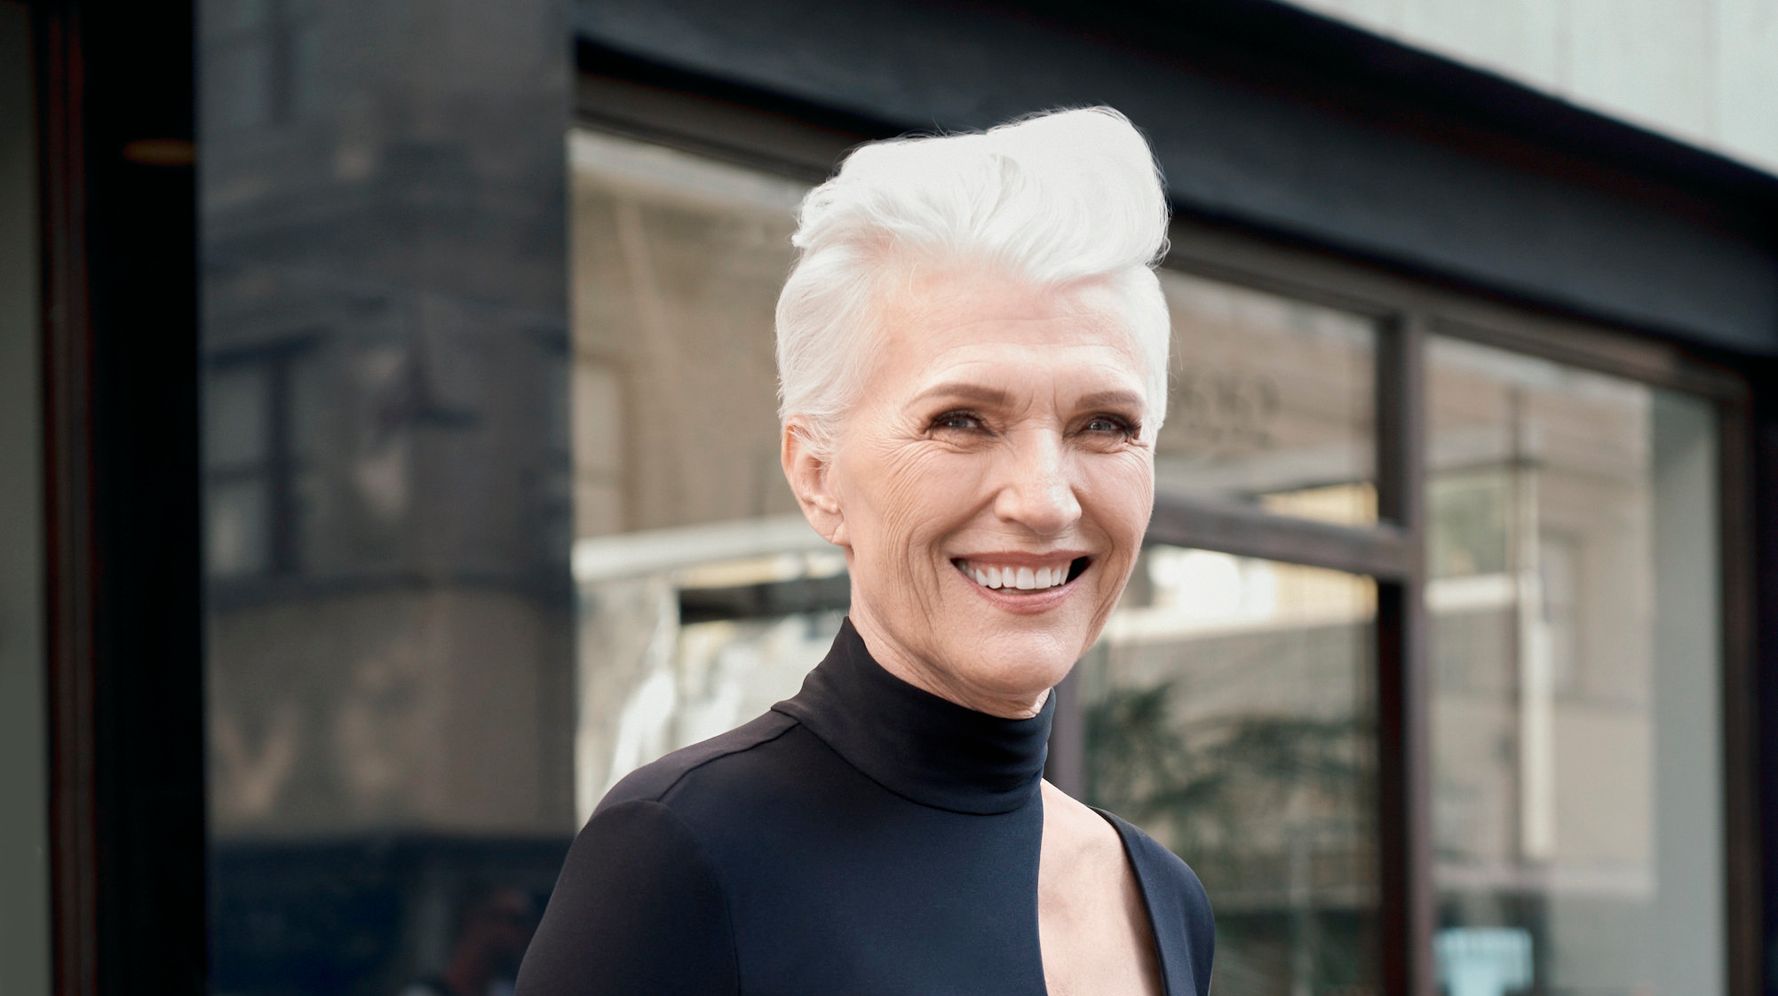 CoverGirl Brings Age Diversity to Its Roster with 69-Year-Old